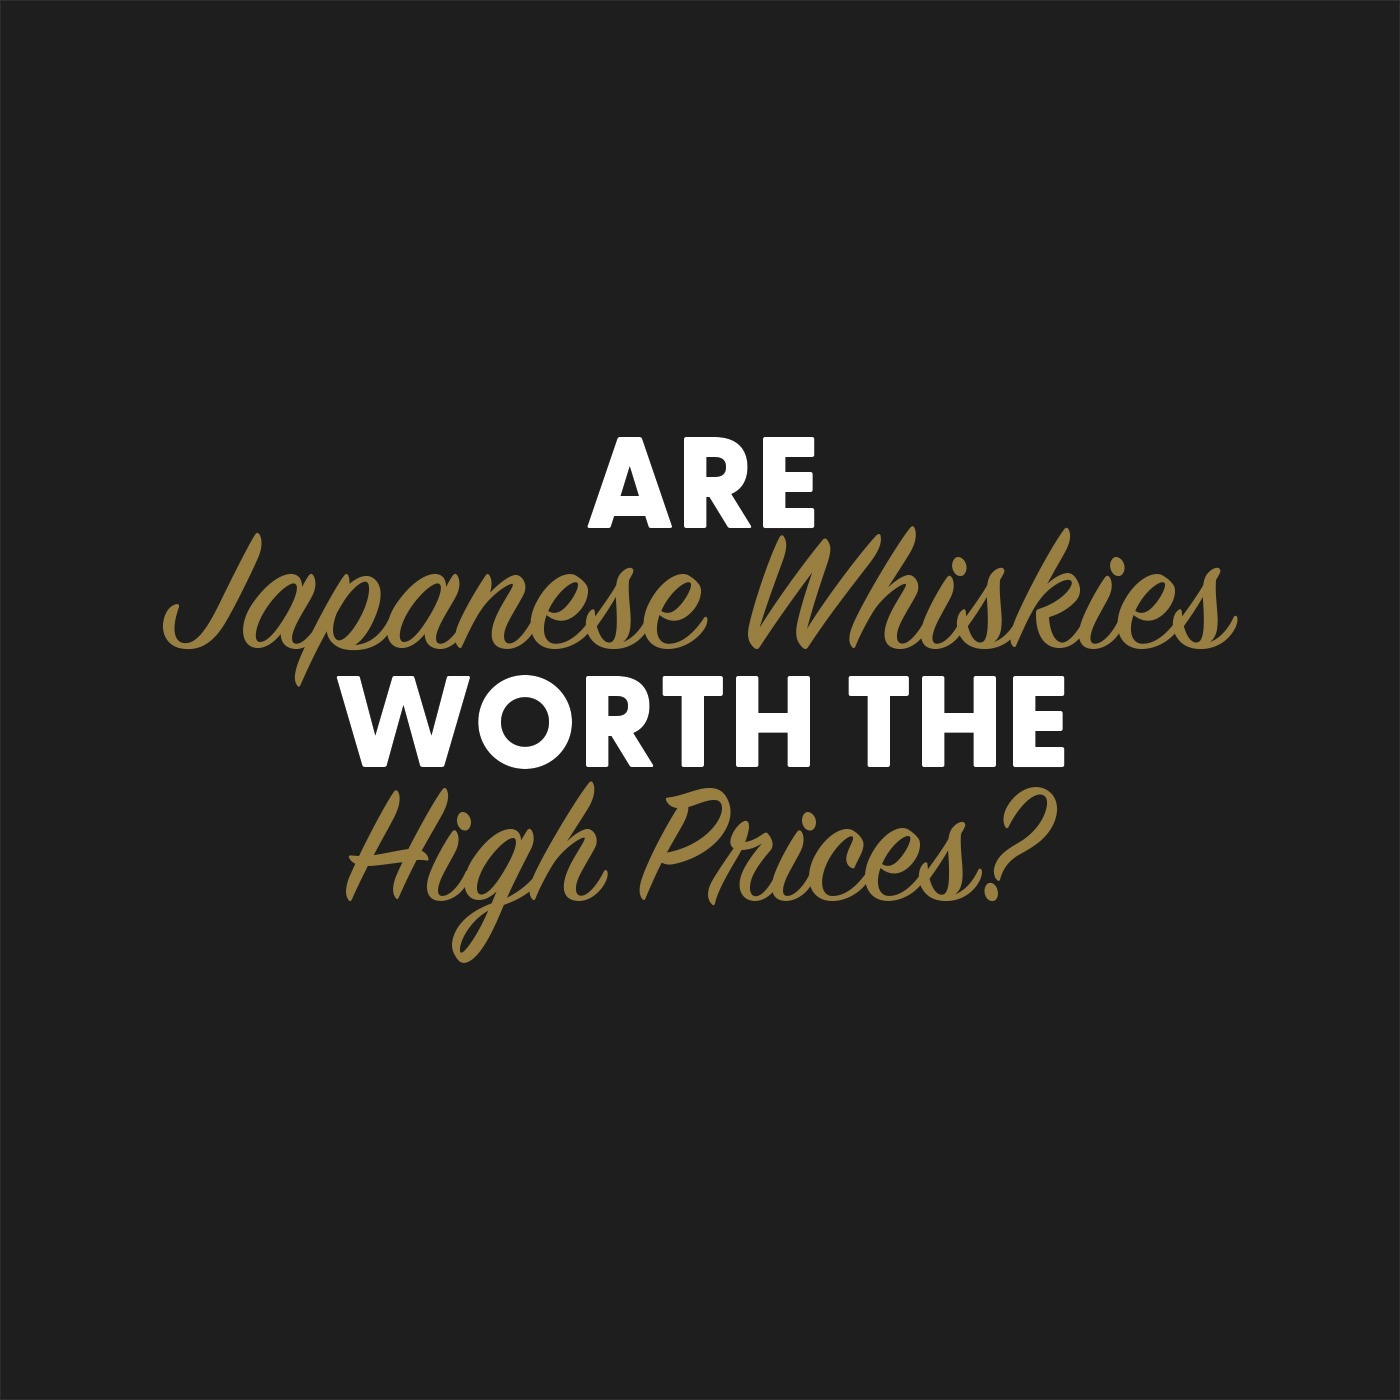 Are Japanese Whiskies Worth the High Prices?